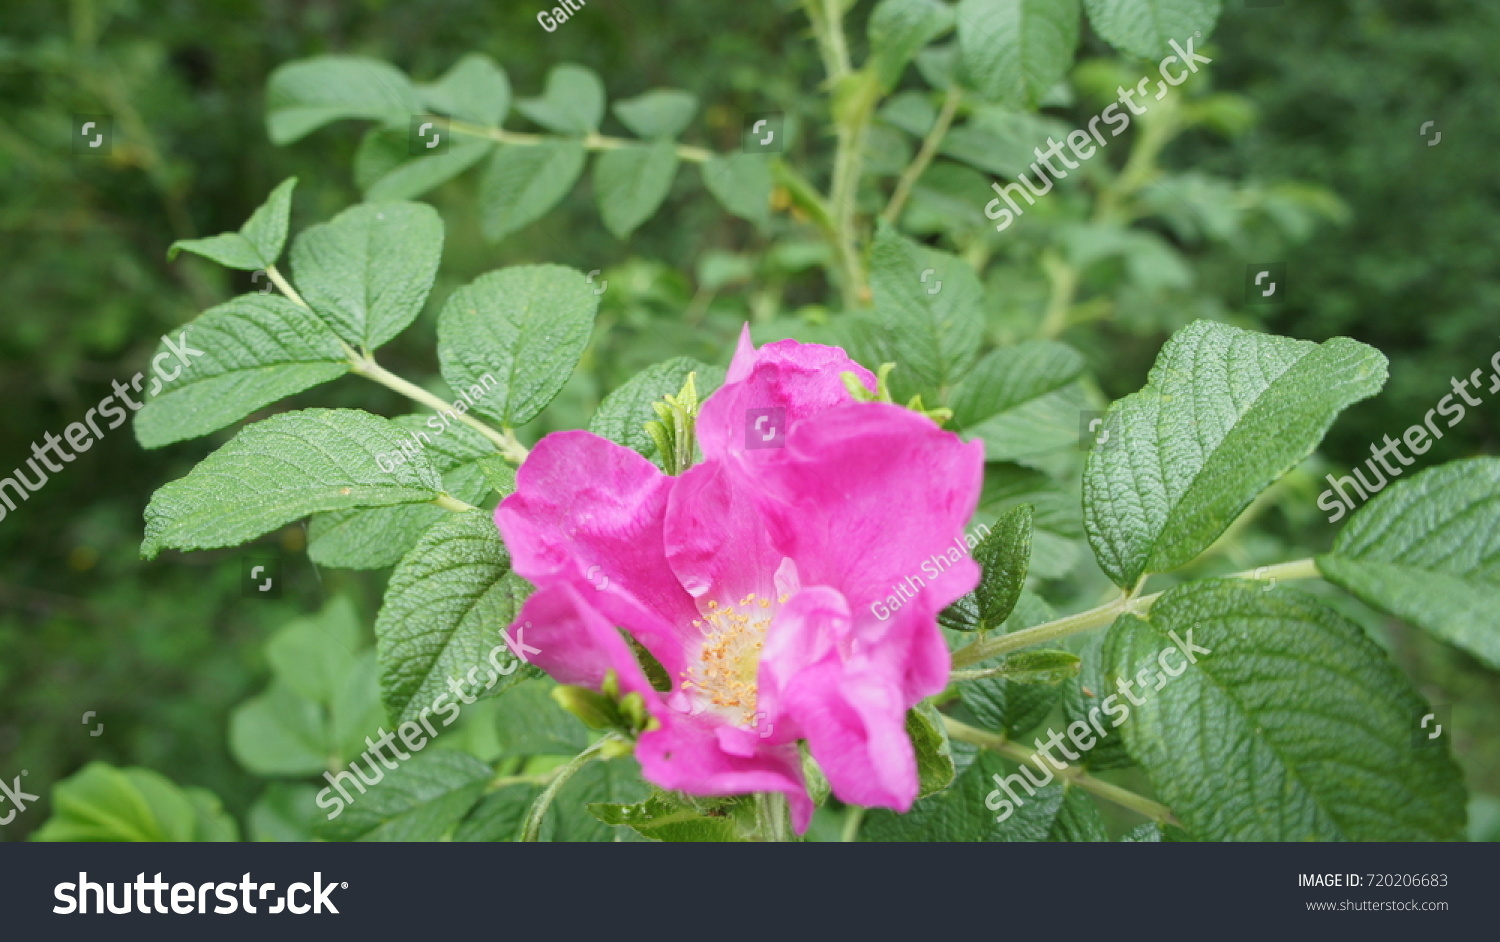 Pink Flower Rose In The Field. #720206683